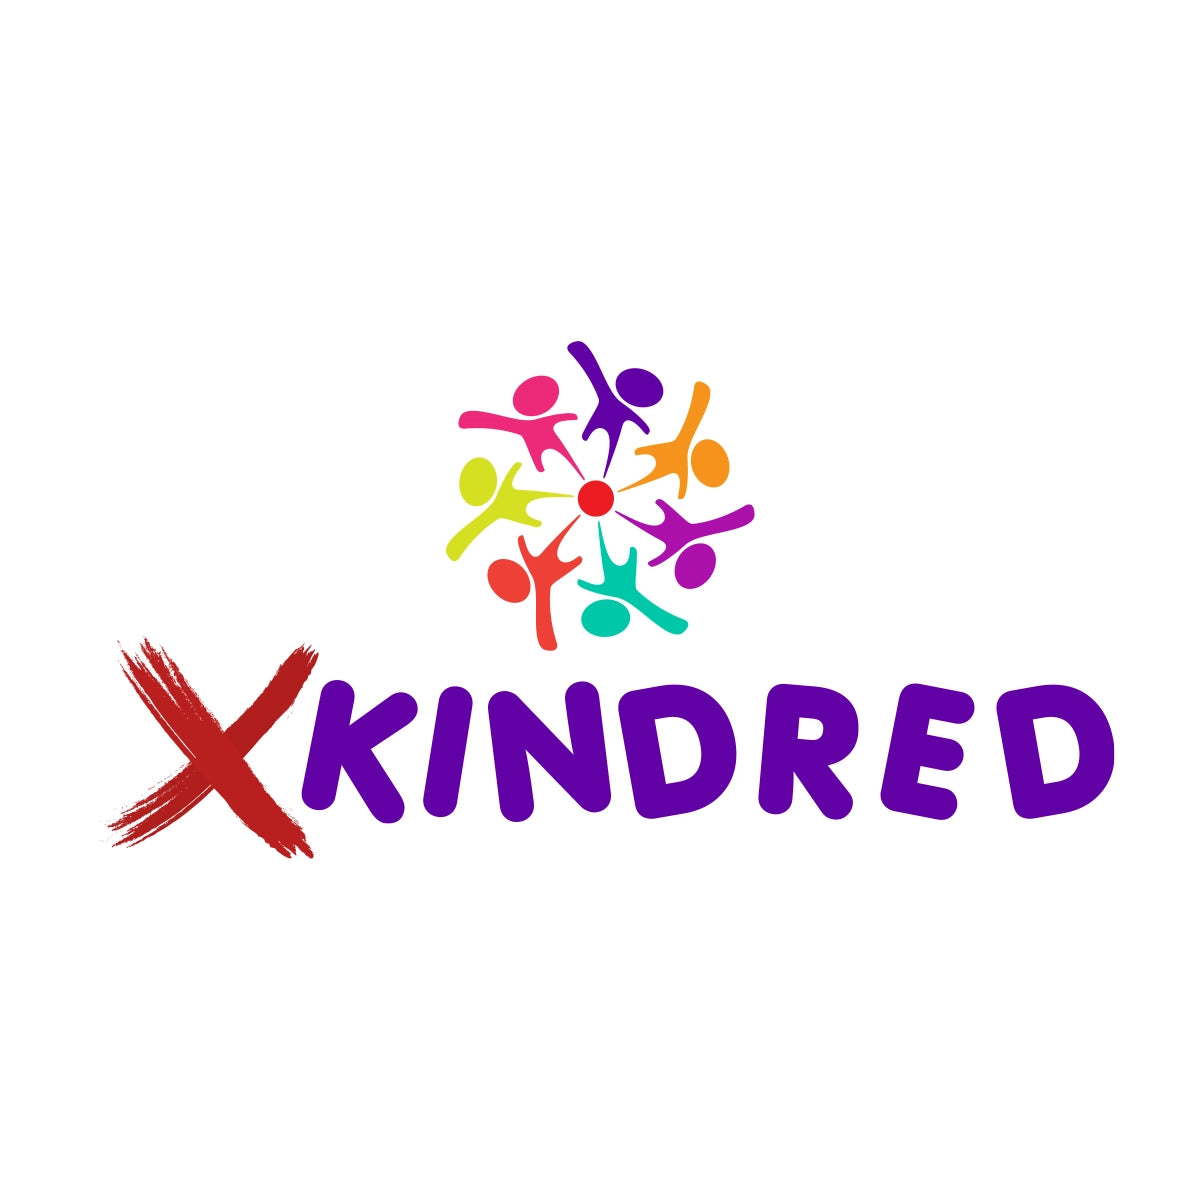 xkindred.com